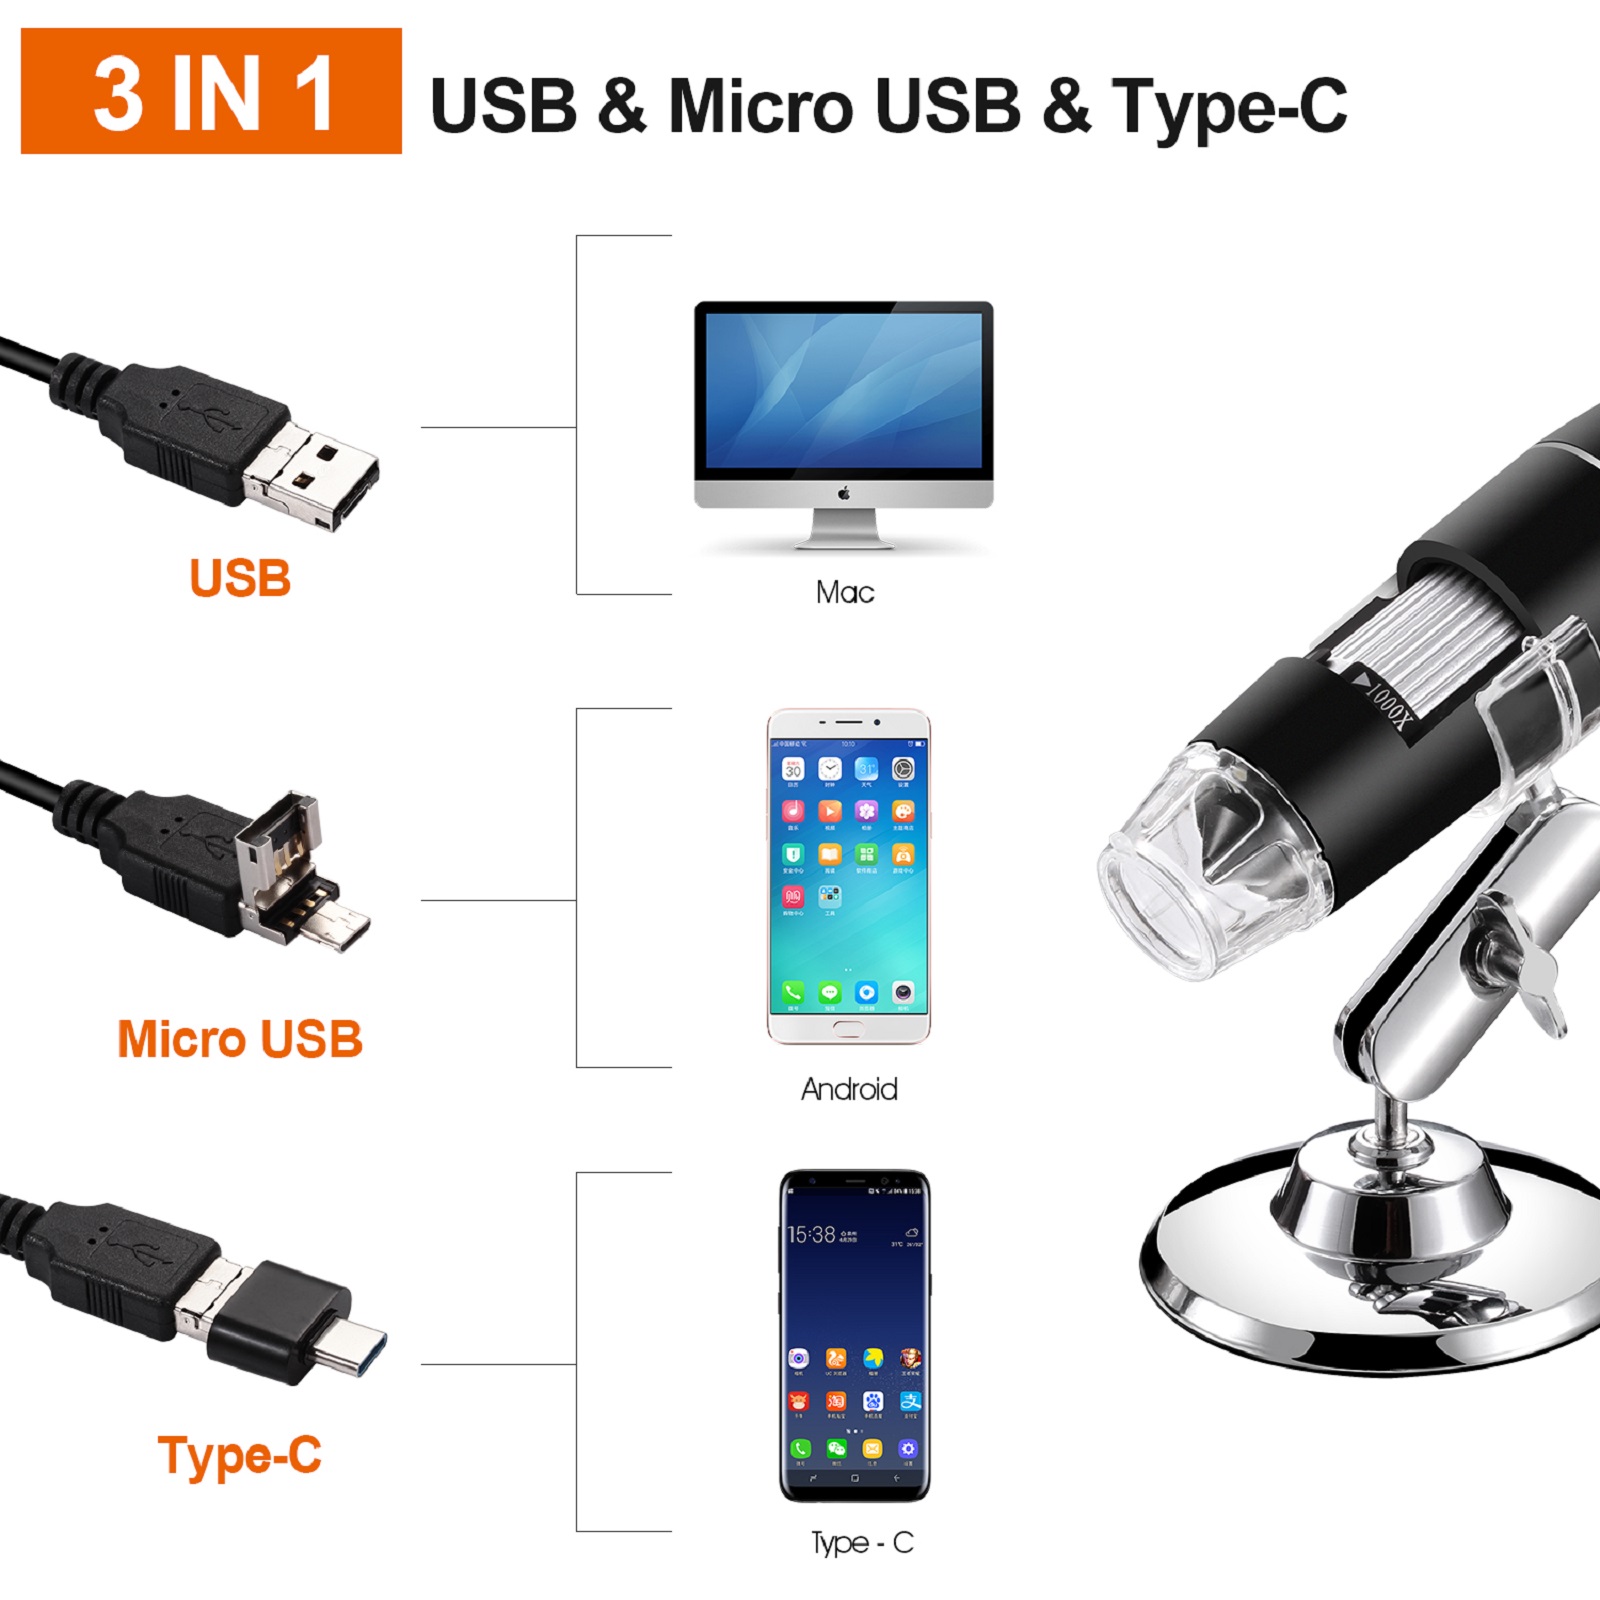 Mini Camera with Stand Digital Microscope 2MP 8 LED USB 2.0 & Micro Digital Microscope 0 to 1000X Magnification Endoscope Compatible with Mac Windows 7 8 10 Android Linux 